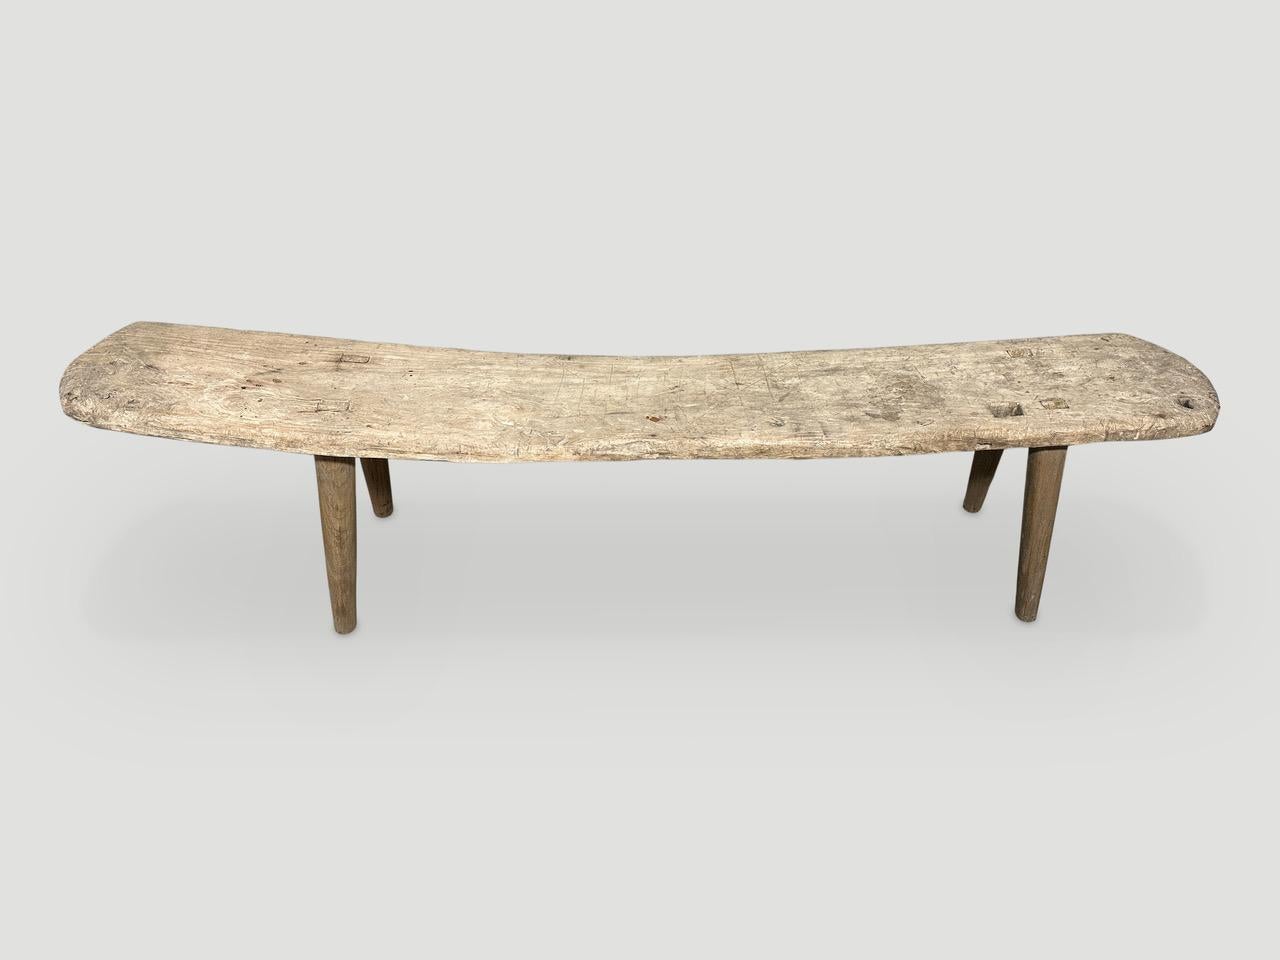 Antique Wabi Sabi teak bench or chaise celebrating the cracks and crevices and all the other marks that time and loving use have left behind. We added smooth teak minimalist legs in contrast to the top. The back rest graduates to 19